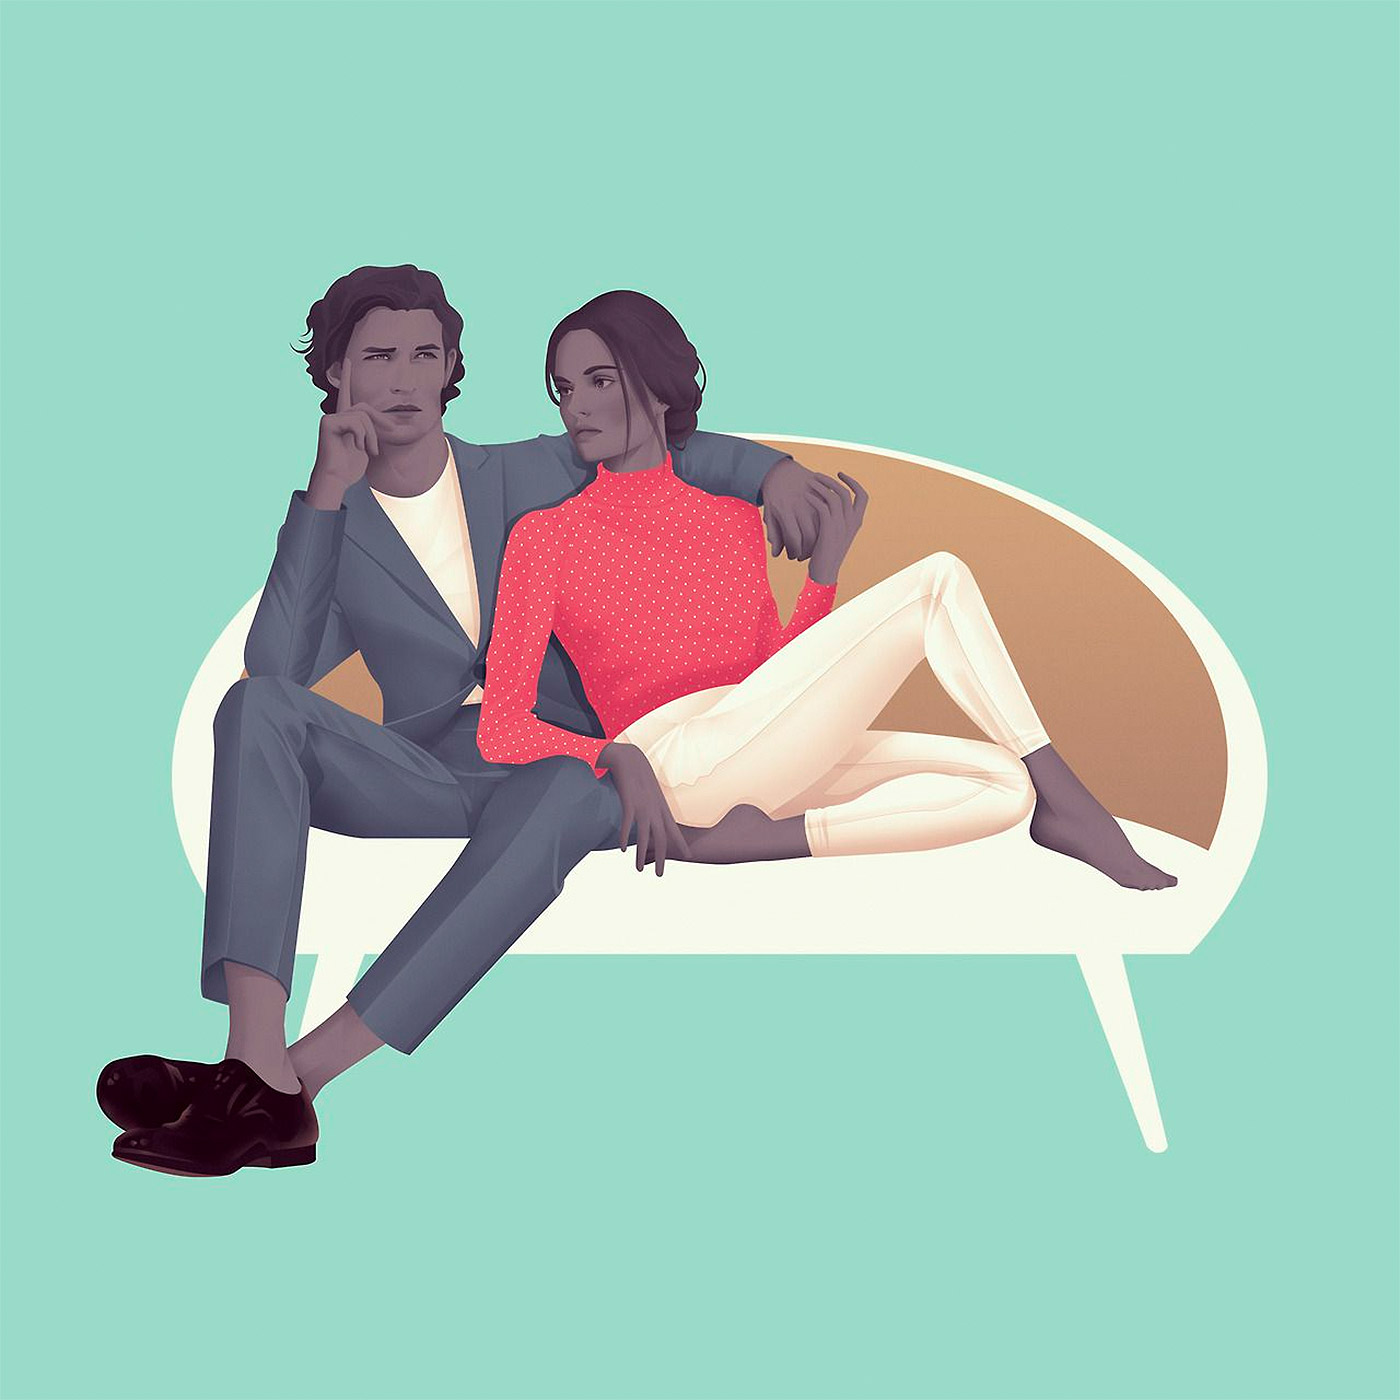 Jack Hughes Projects  Photos, videos, logos, illustrations and